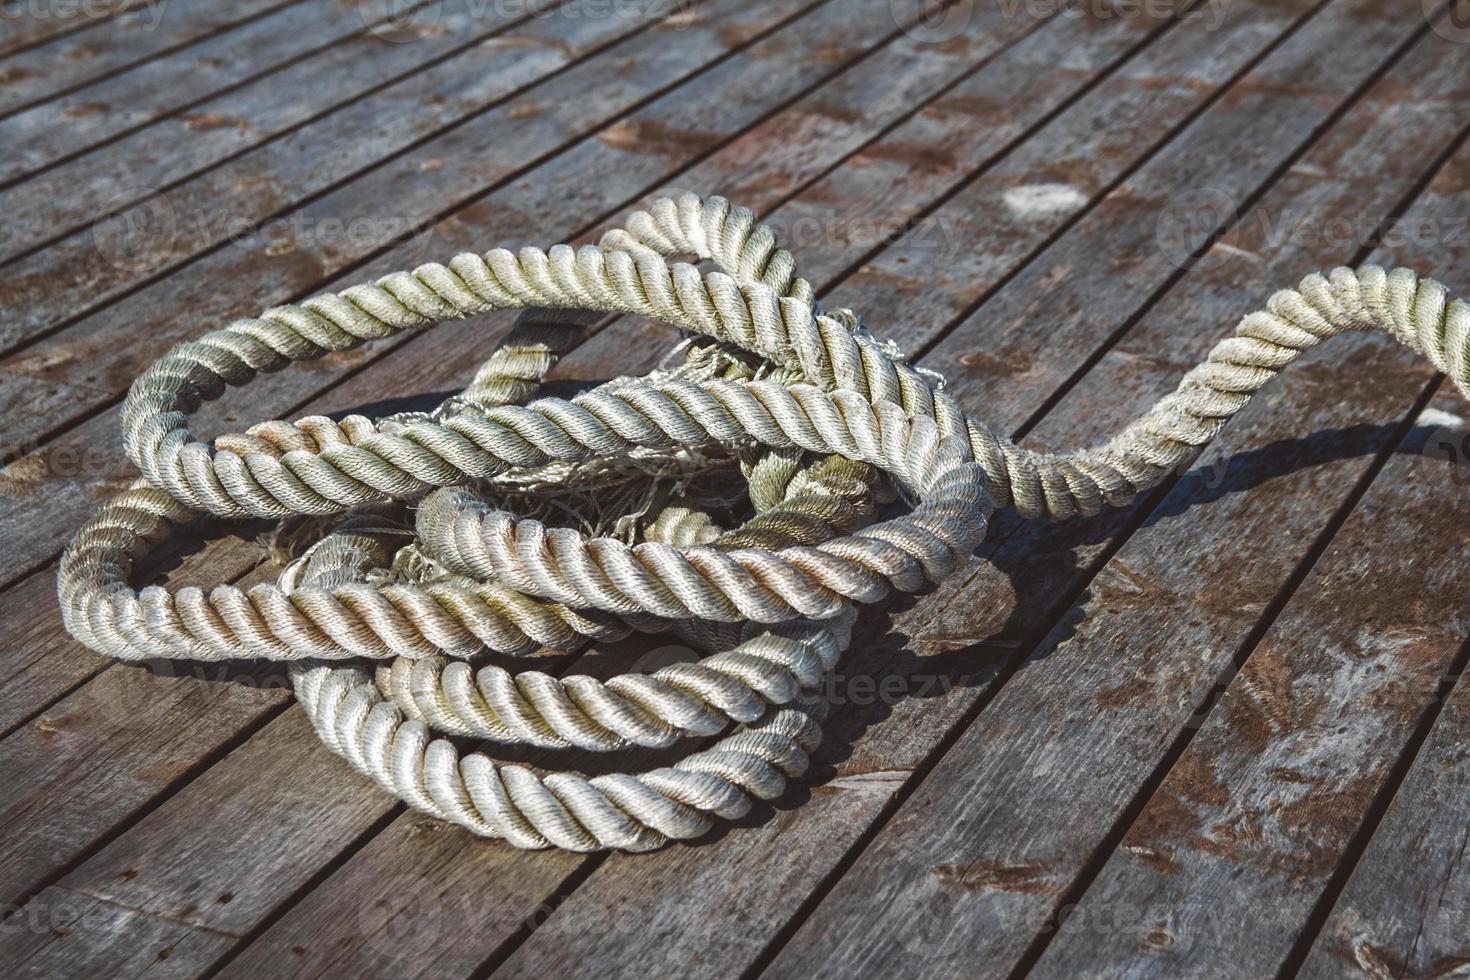 Mooring rope on wooden pier photo